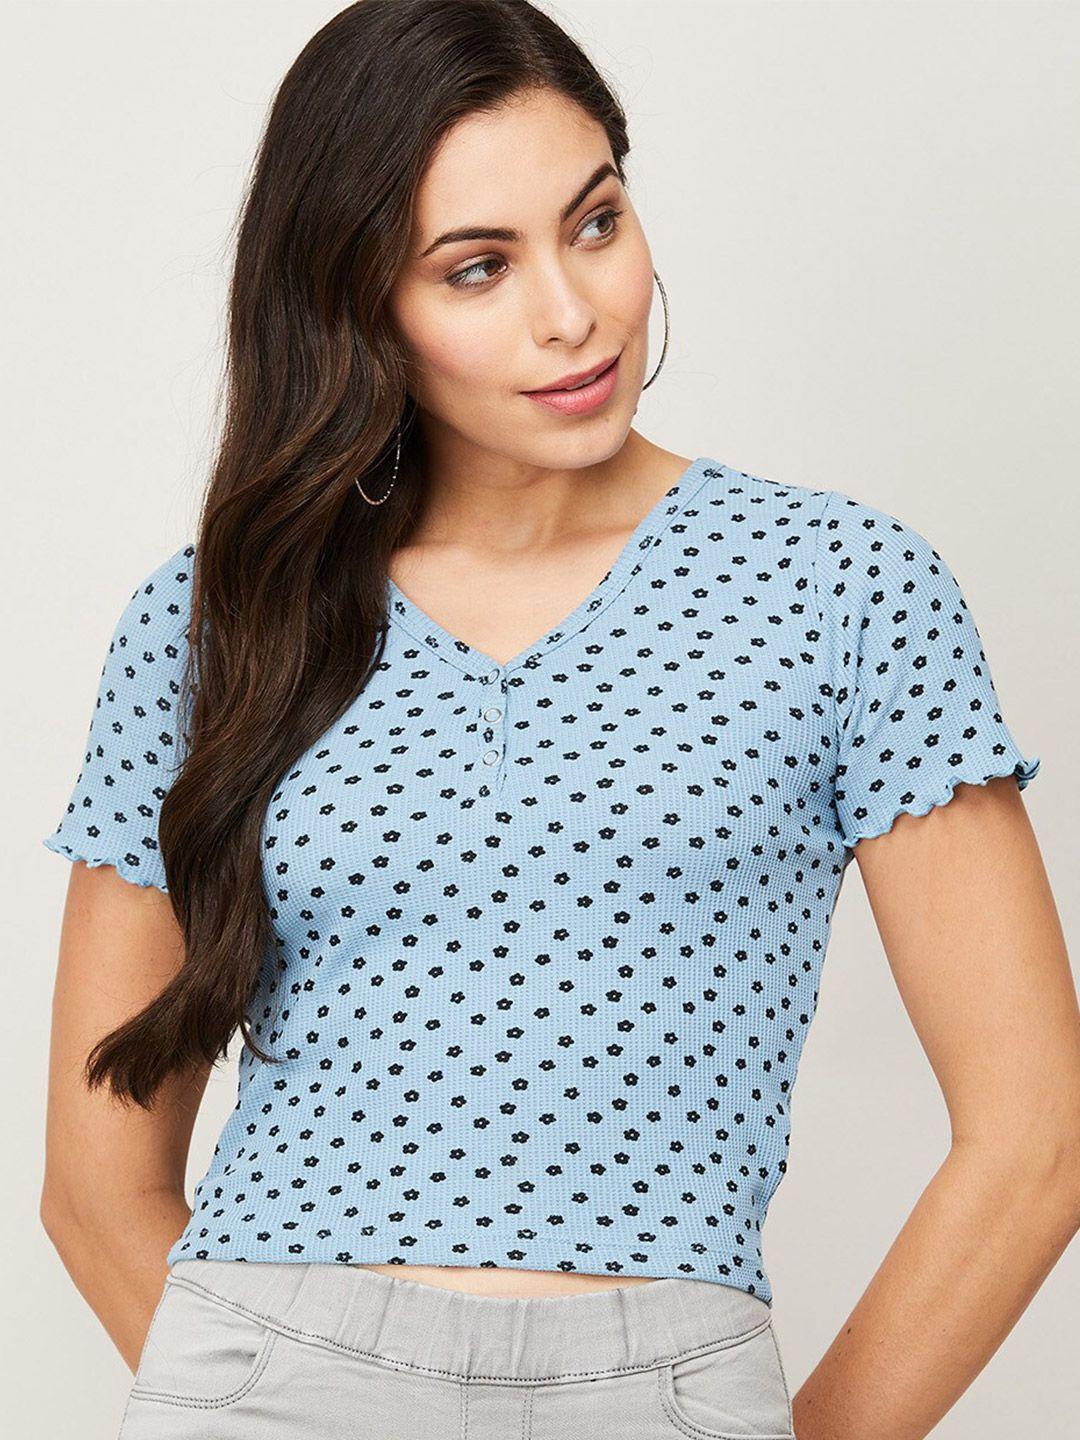 ginger-by-lifestyle-blue-geometric-print-crop-top